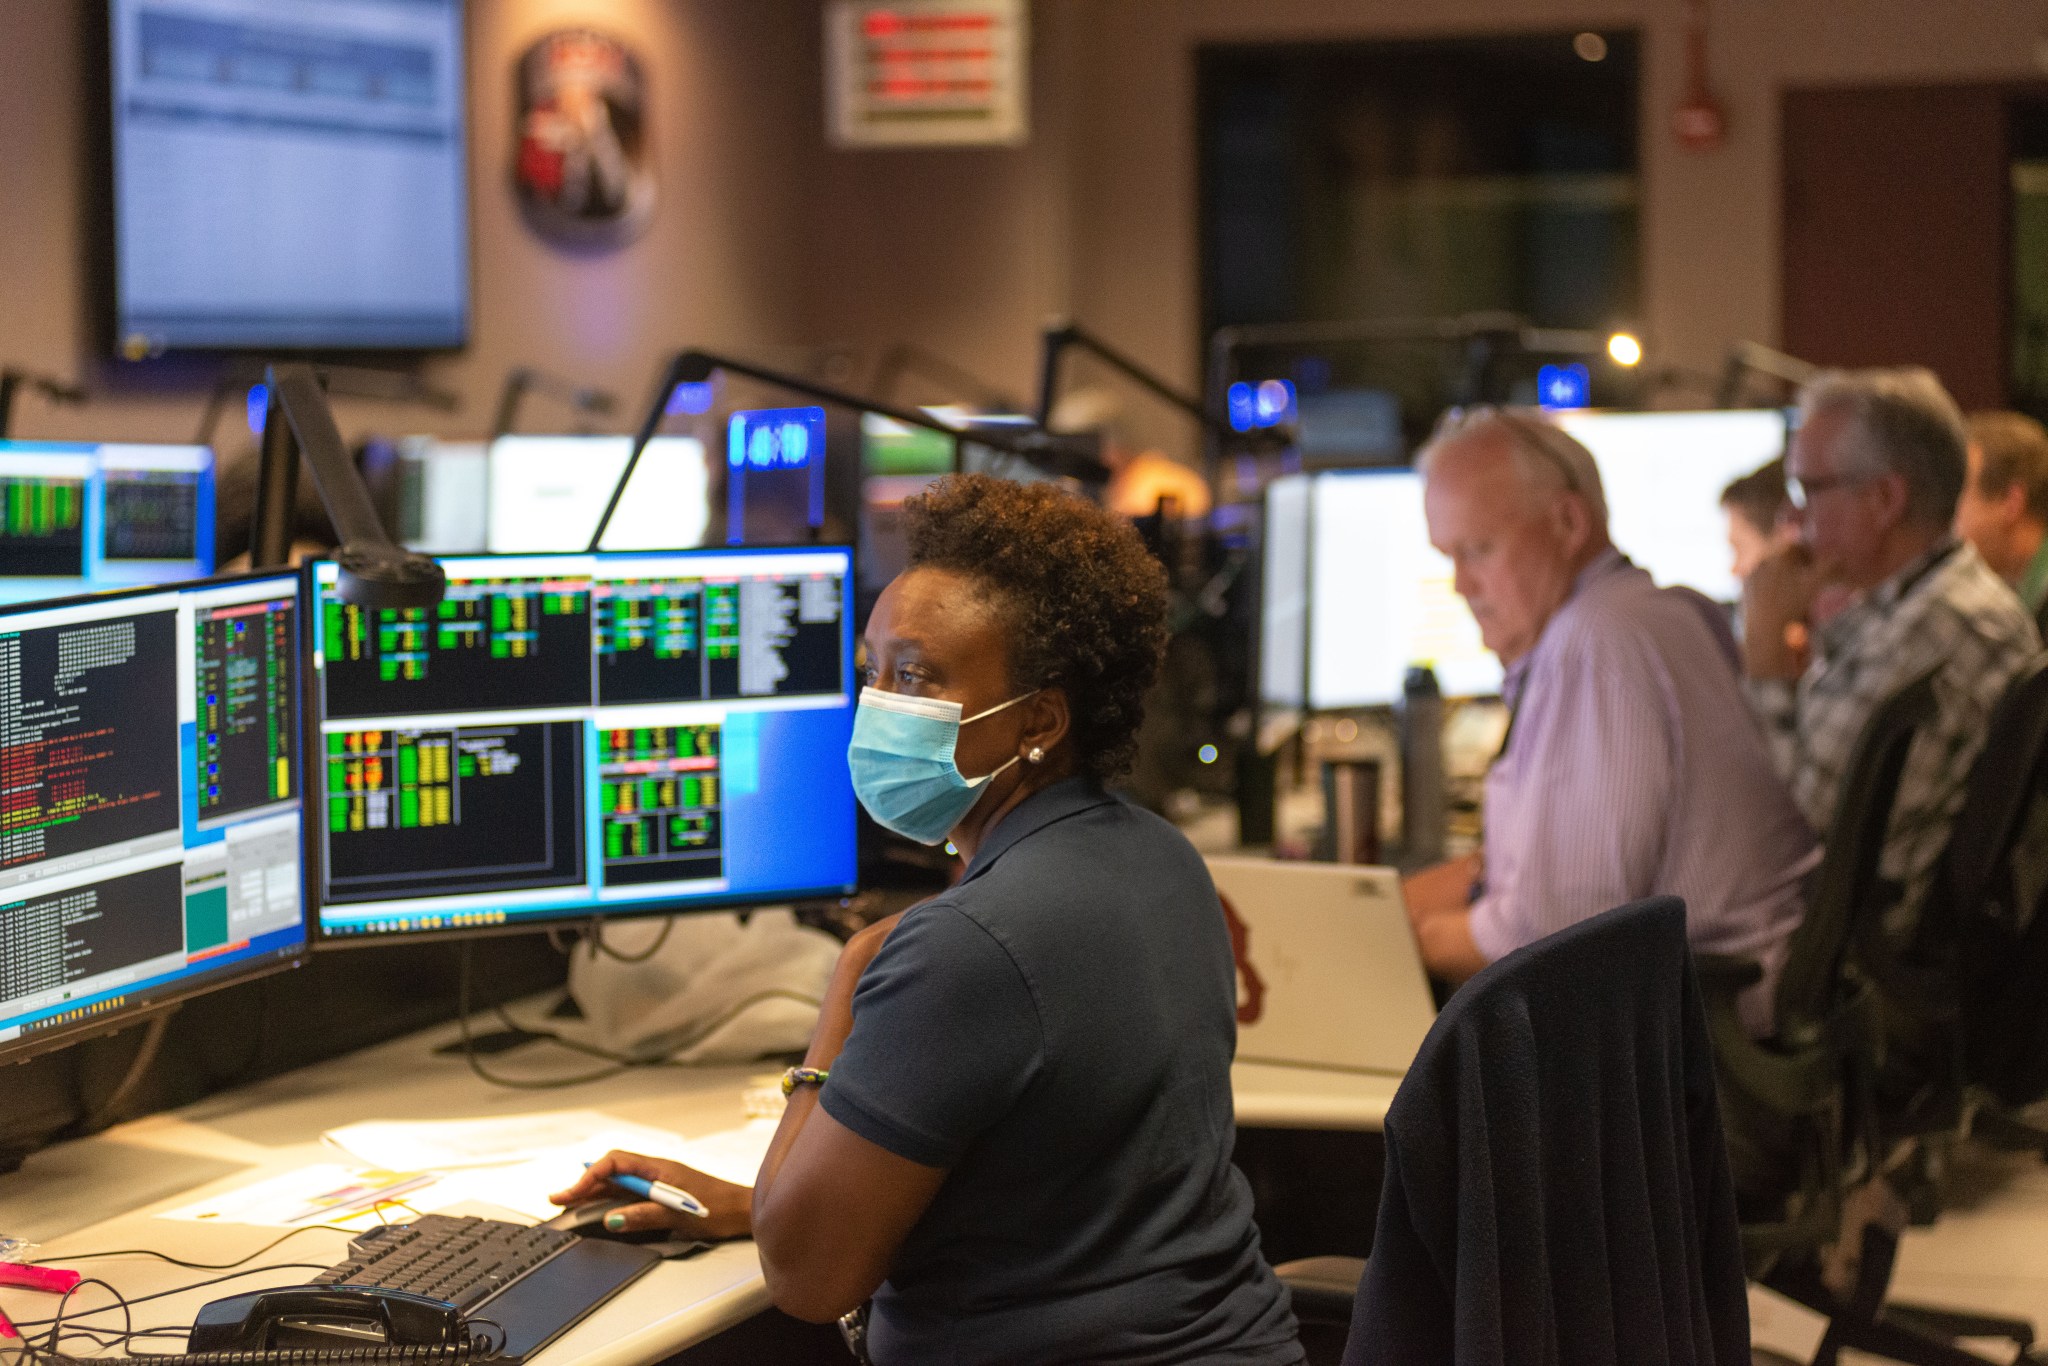 Center: Nzinga Tull sits in front of several computer screens filled with computer code and data. To her right and farther back in the image sit several other Hubble Mission Operations Specialists.